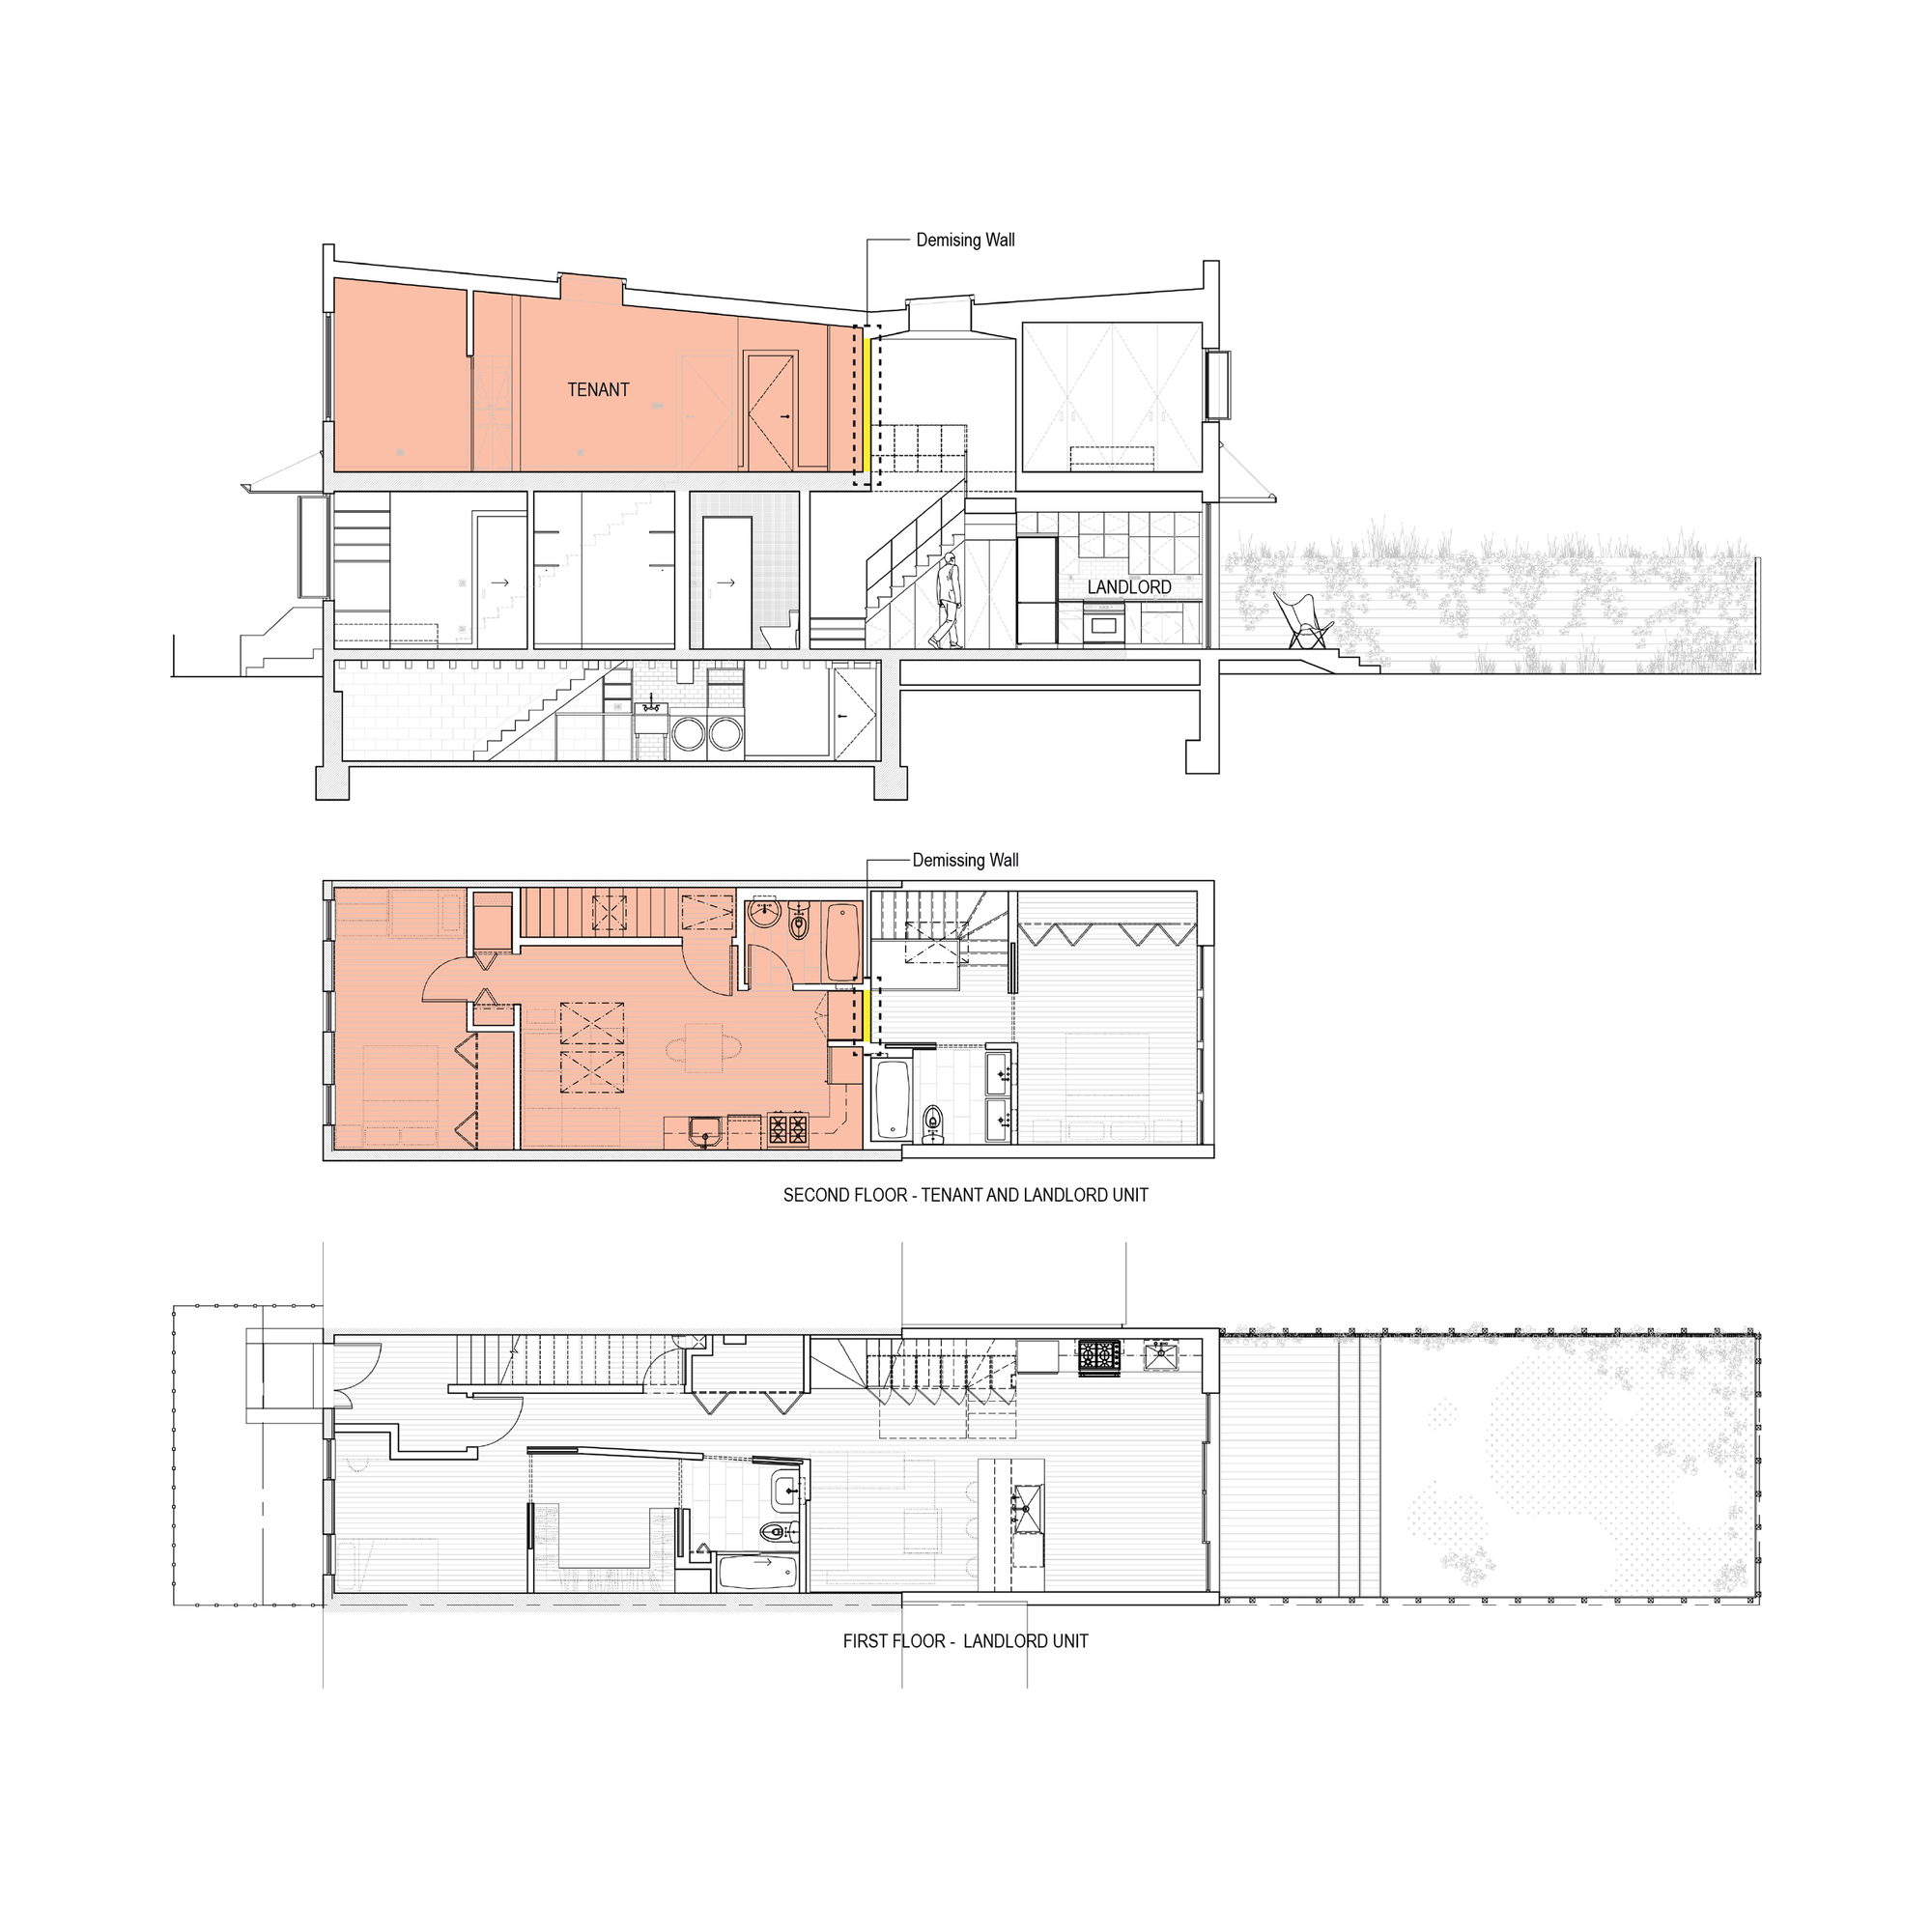 54f797e2e58ece08b40001c9_brooklyn-row-house-office-of-architecture_section_-1-